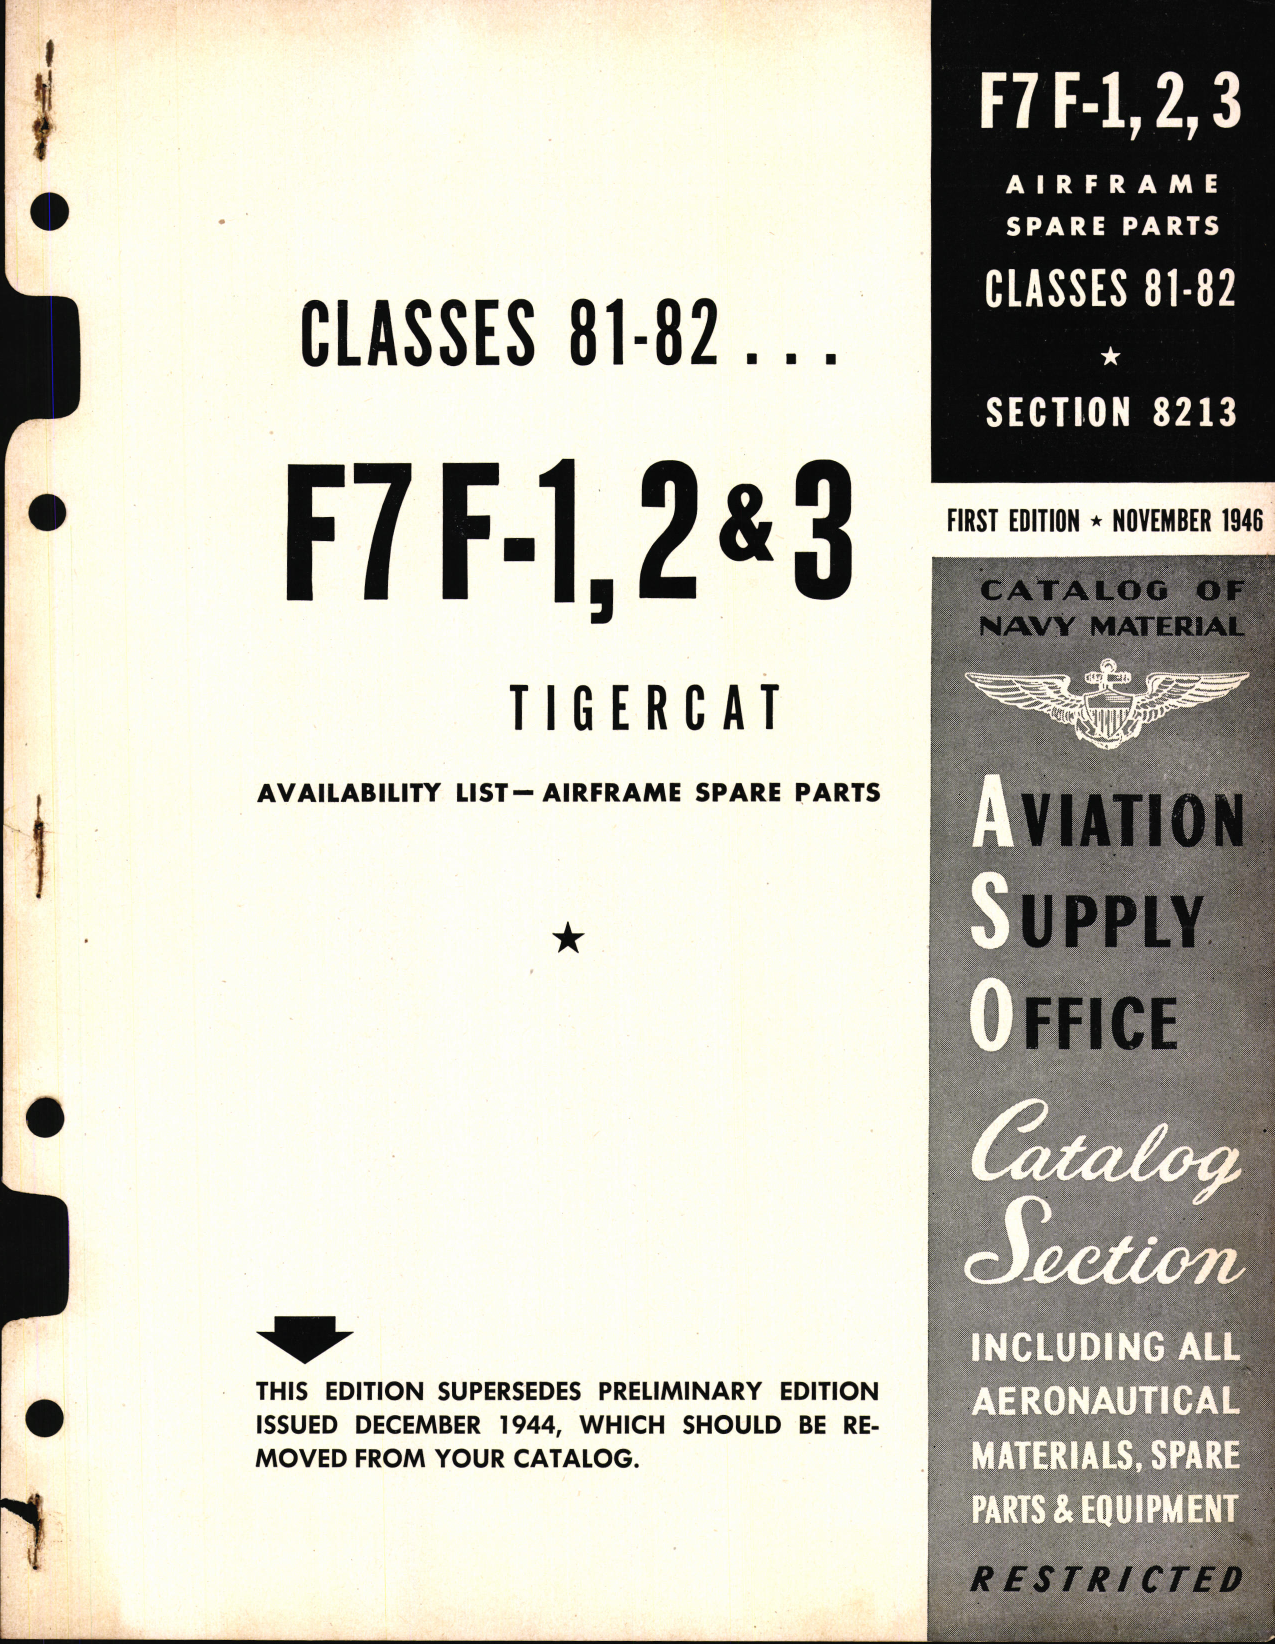 Sample page 1 from AirCorps Library document: F7 F-1, 2&3 Tigercat Availability List and Airframe Spare Parts